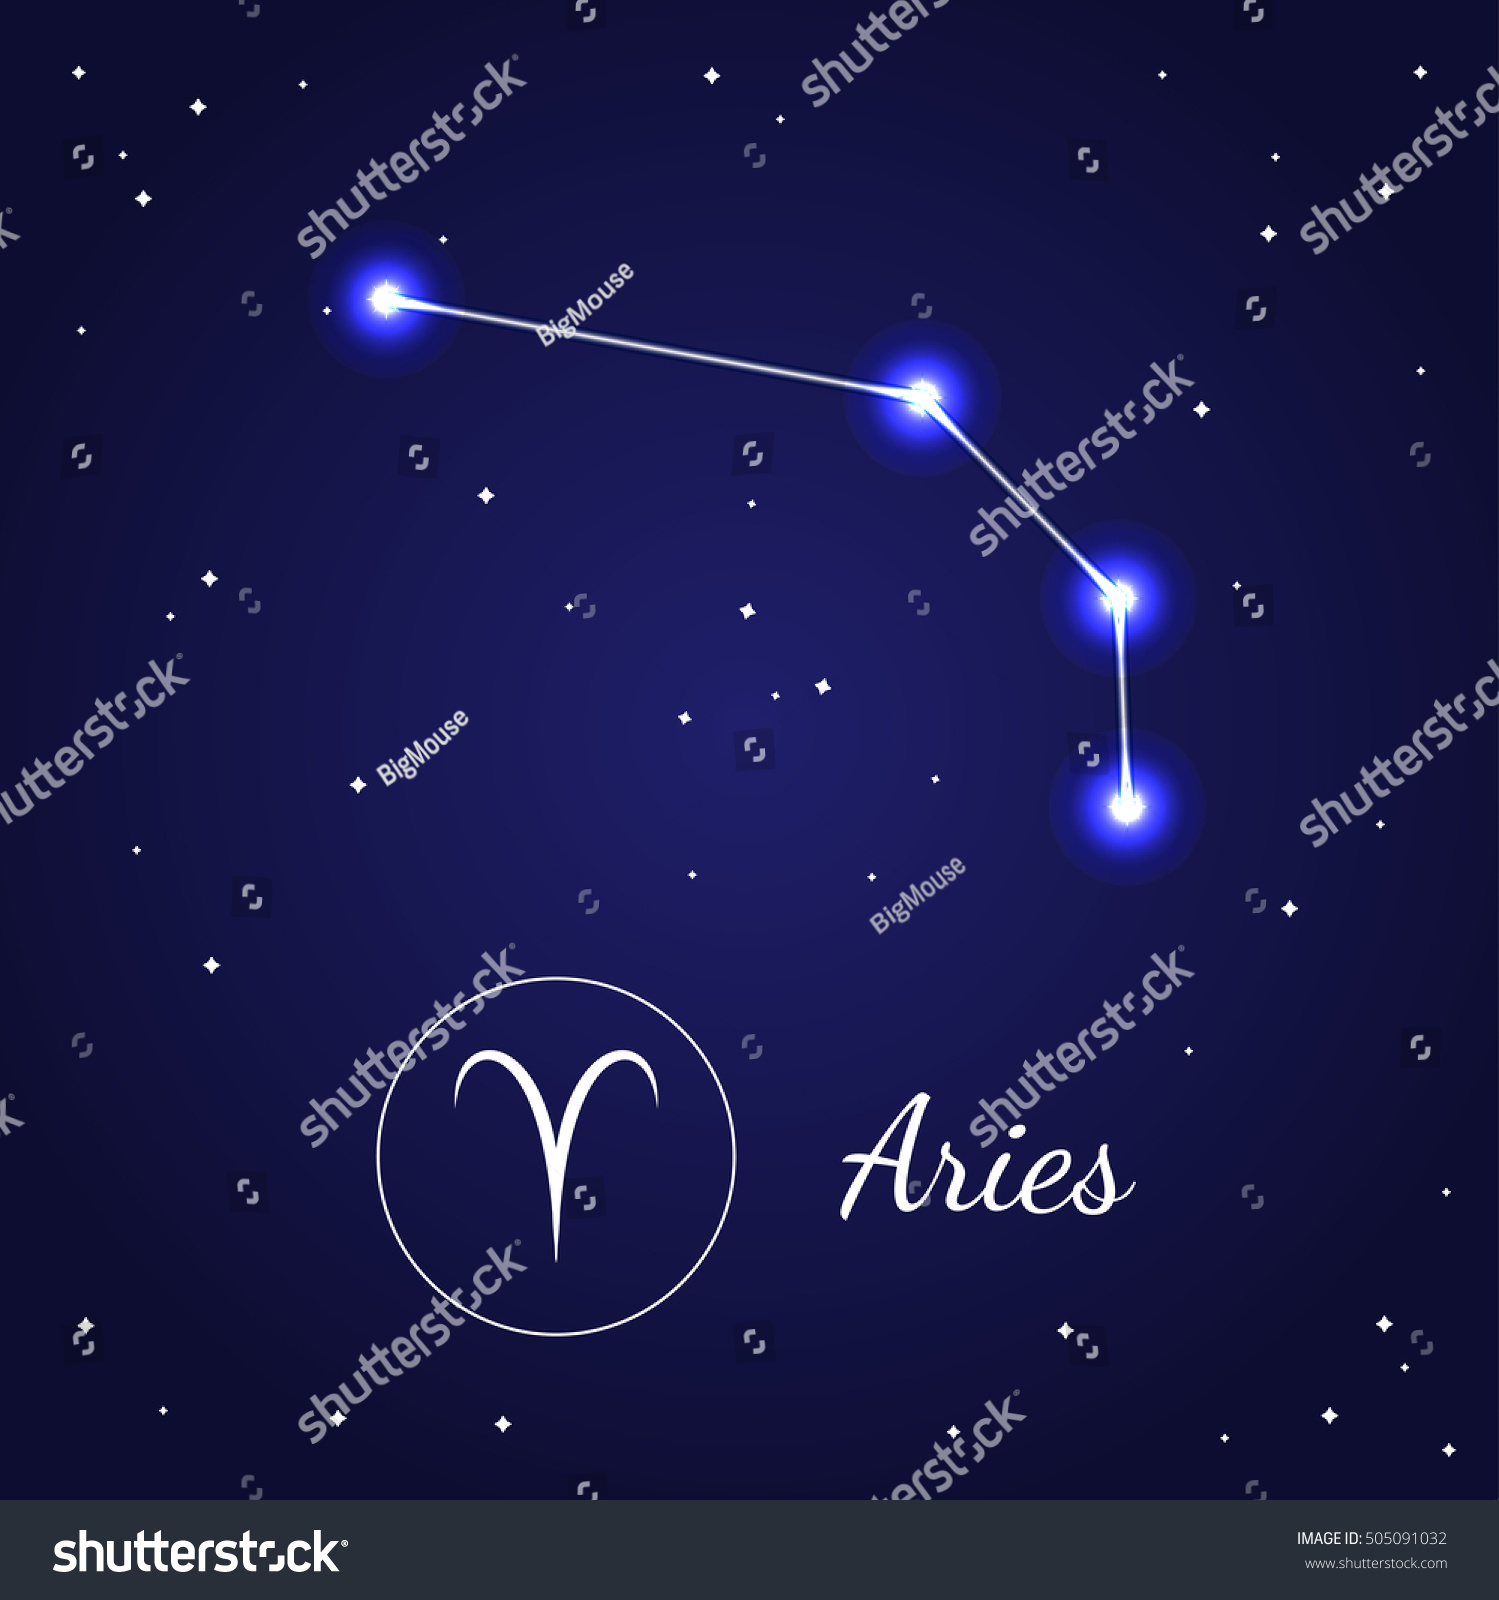 Aries Zodiac Sign Stars On Cosmic Stock Vector (Royalty Free) 505091032